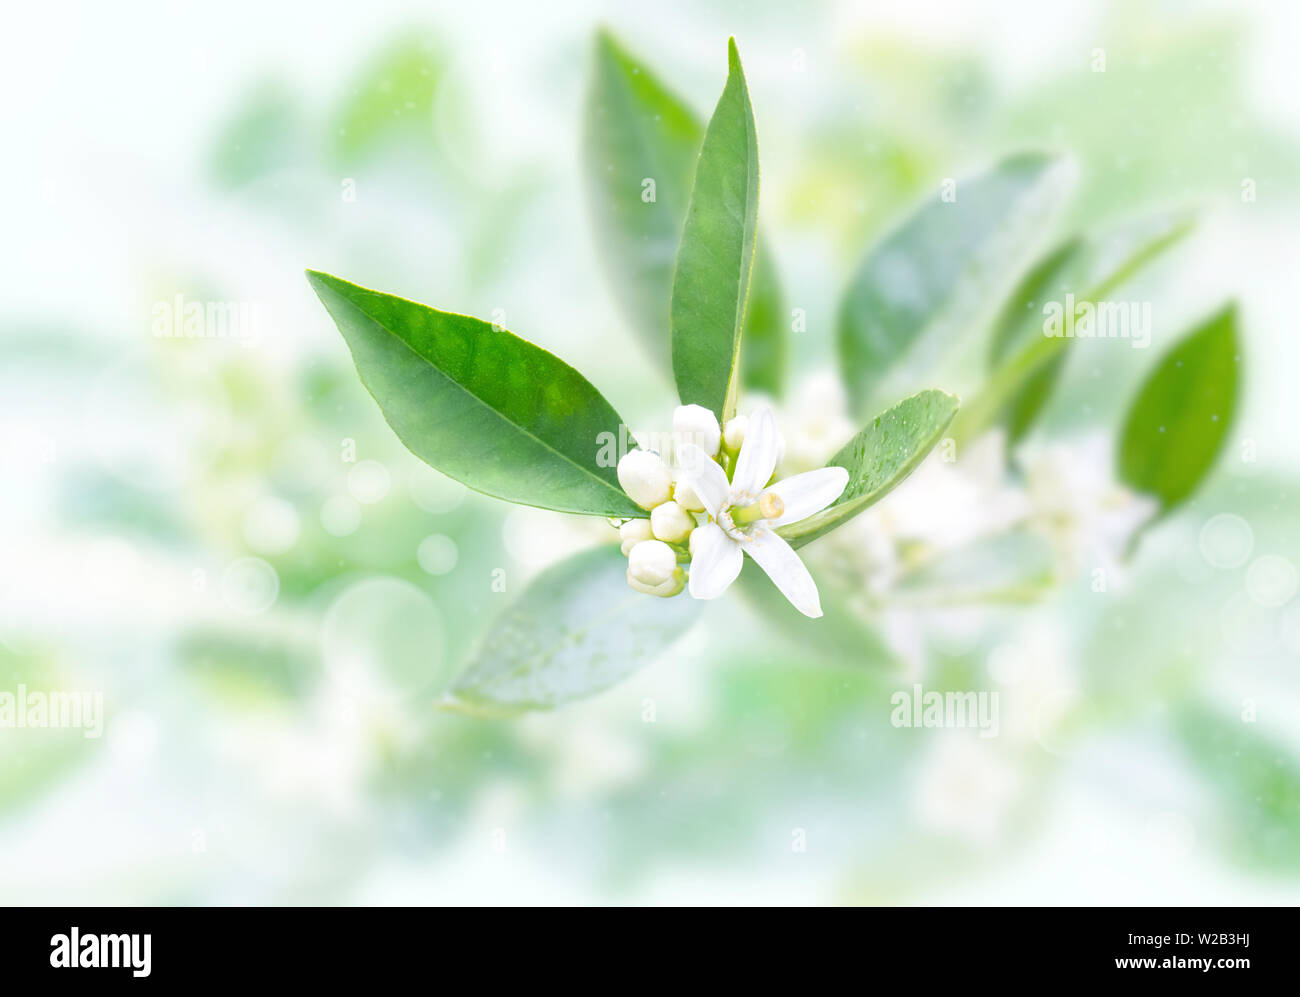 Neroli flowers and buds and green foliage after spring rain on the blurred garden background. Orange tree blossom. Azahar parfum flowering. Stock Photo